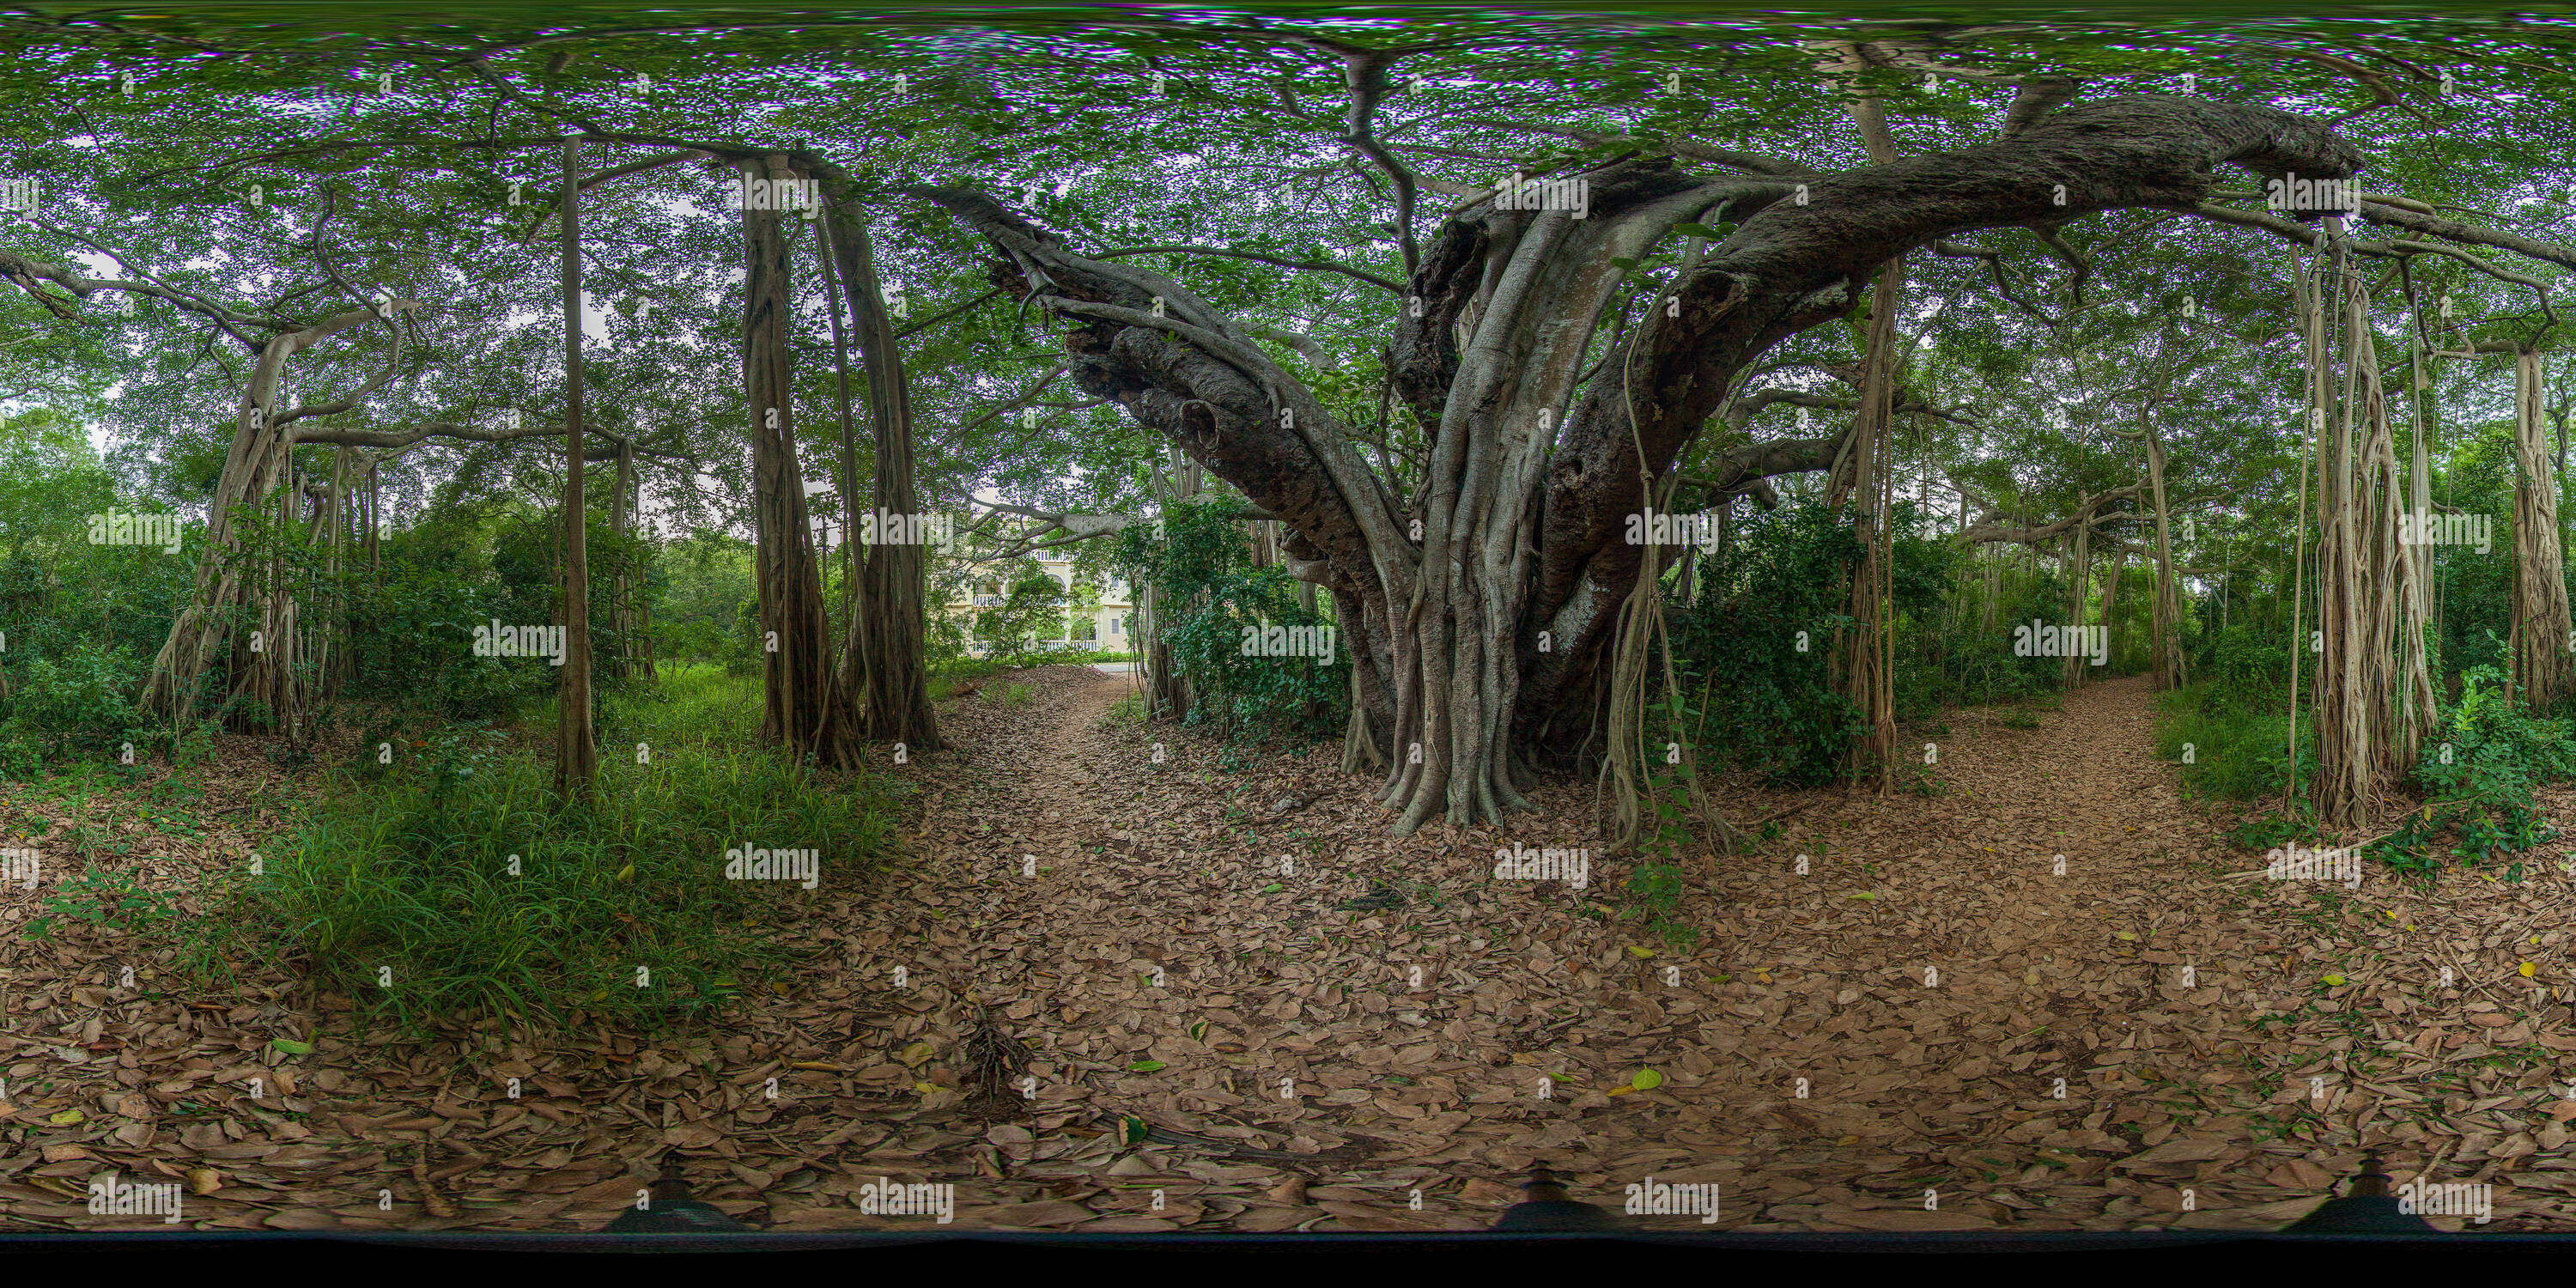 360 degree panoramic view of Banyan Tree inside The Theosophical Society Adyar 03